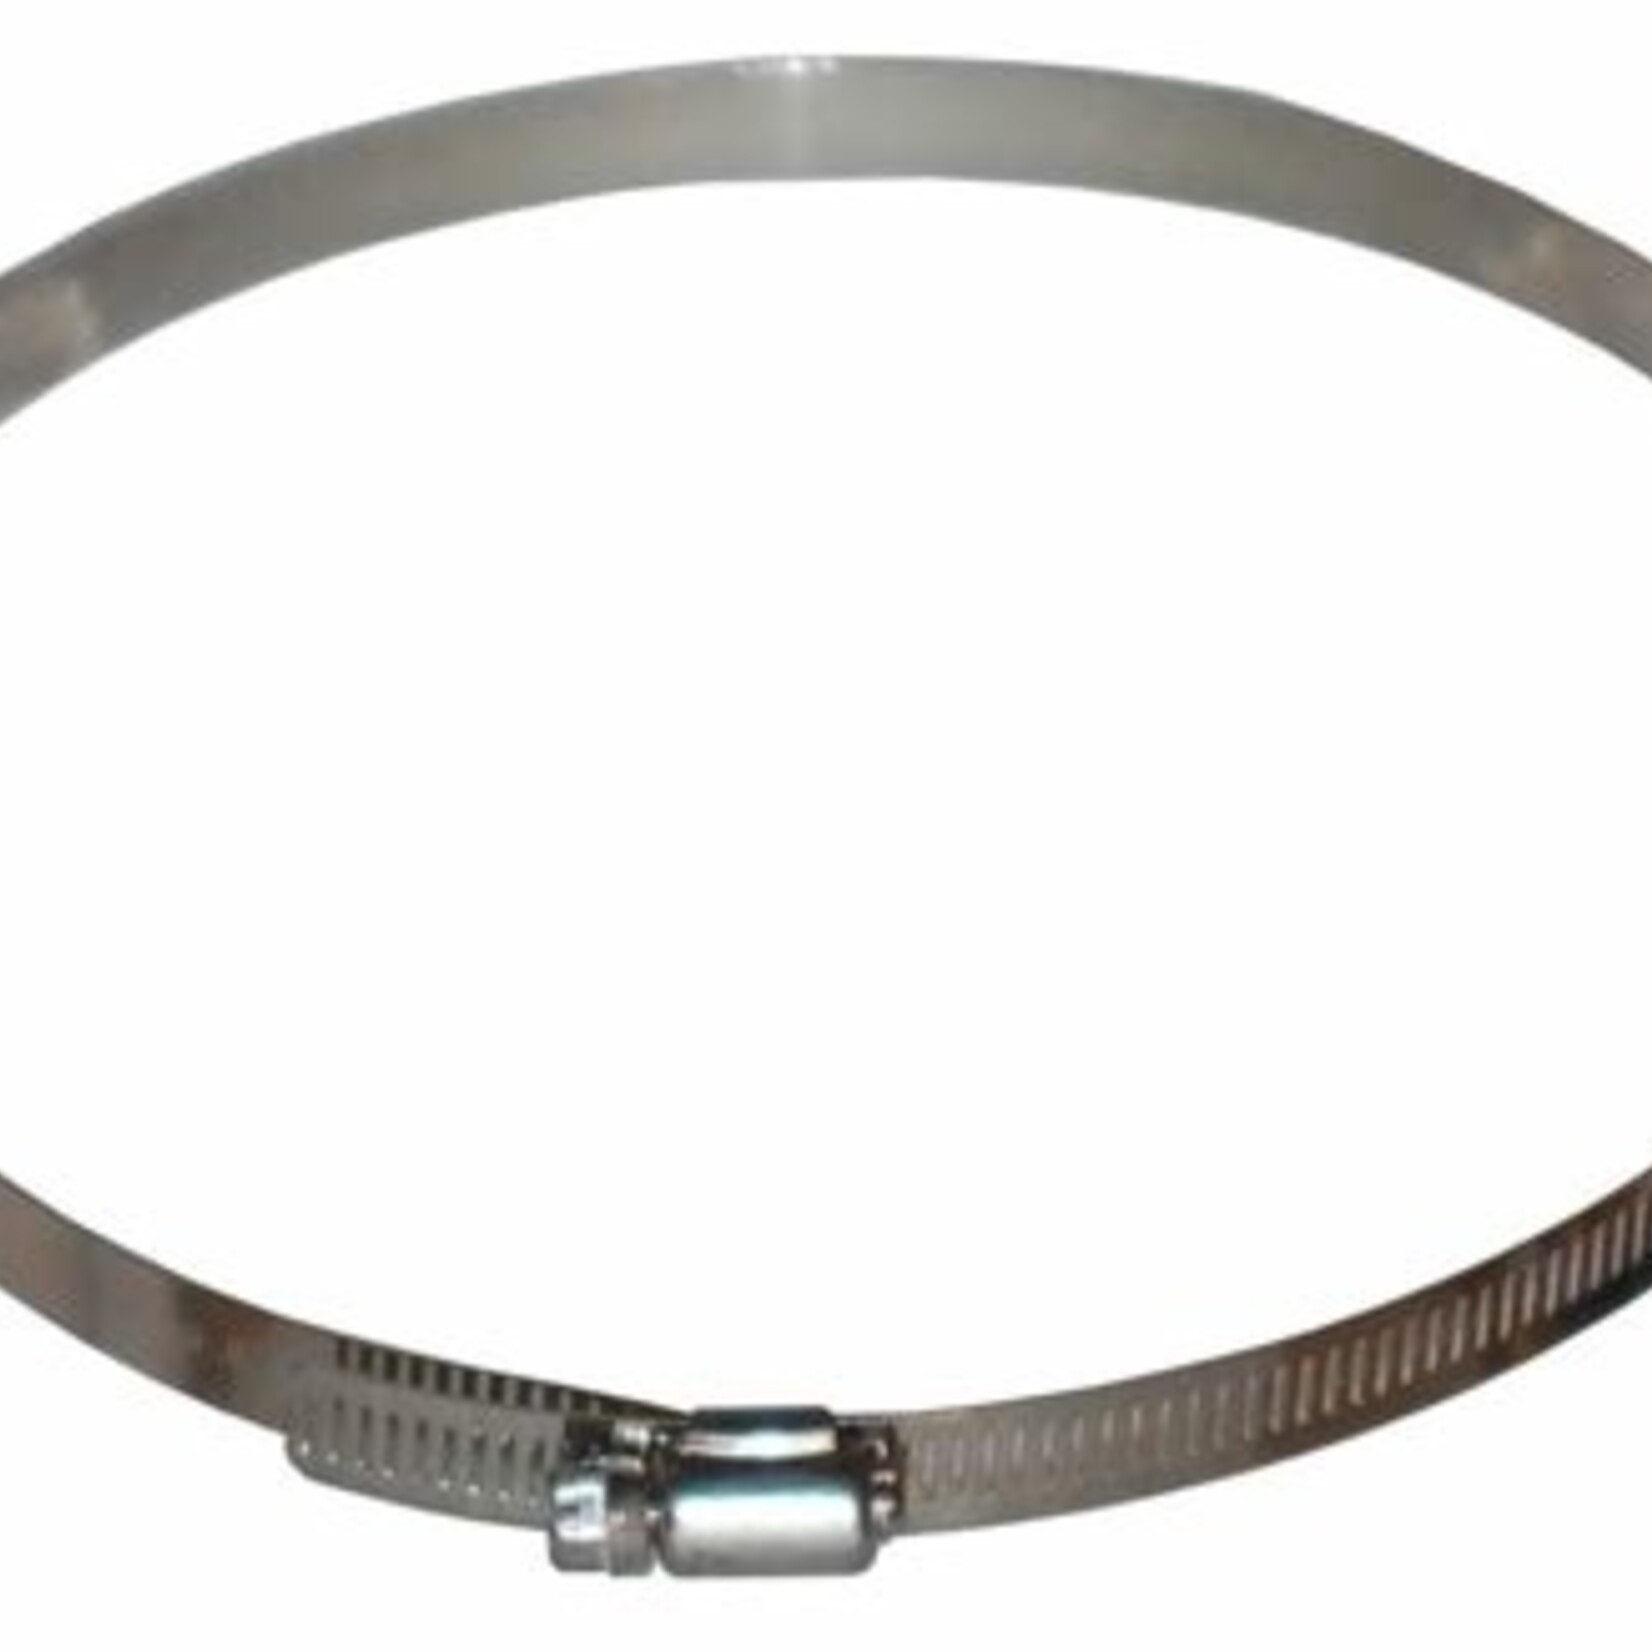 Active Air Stainless Steel Duct Clamps - 8""